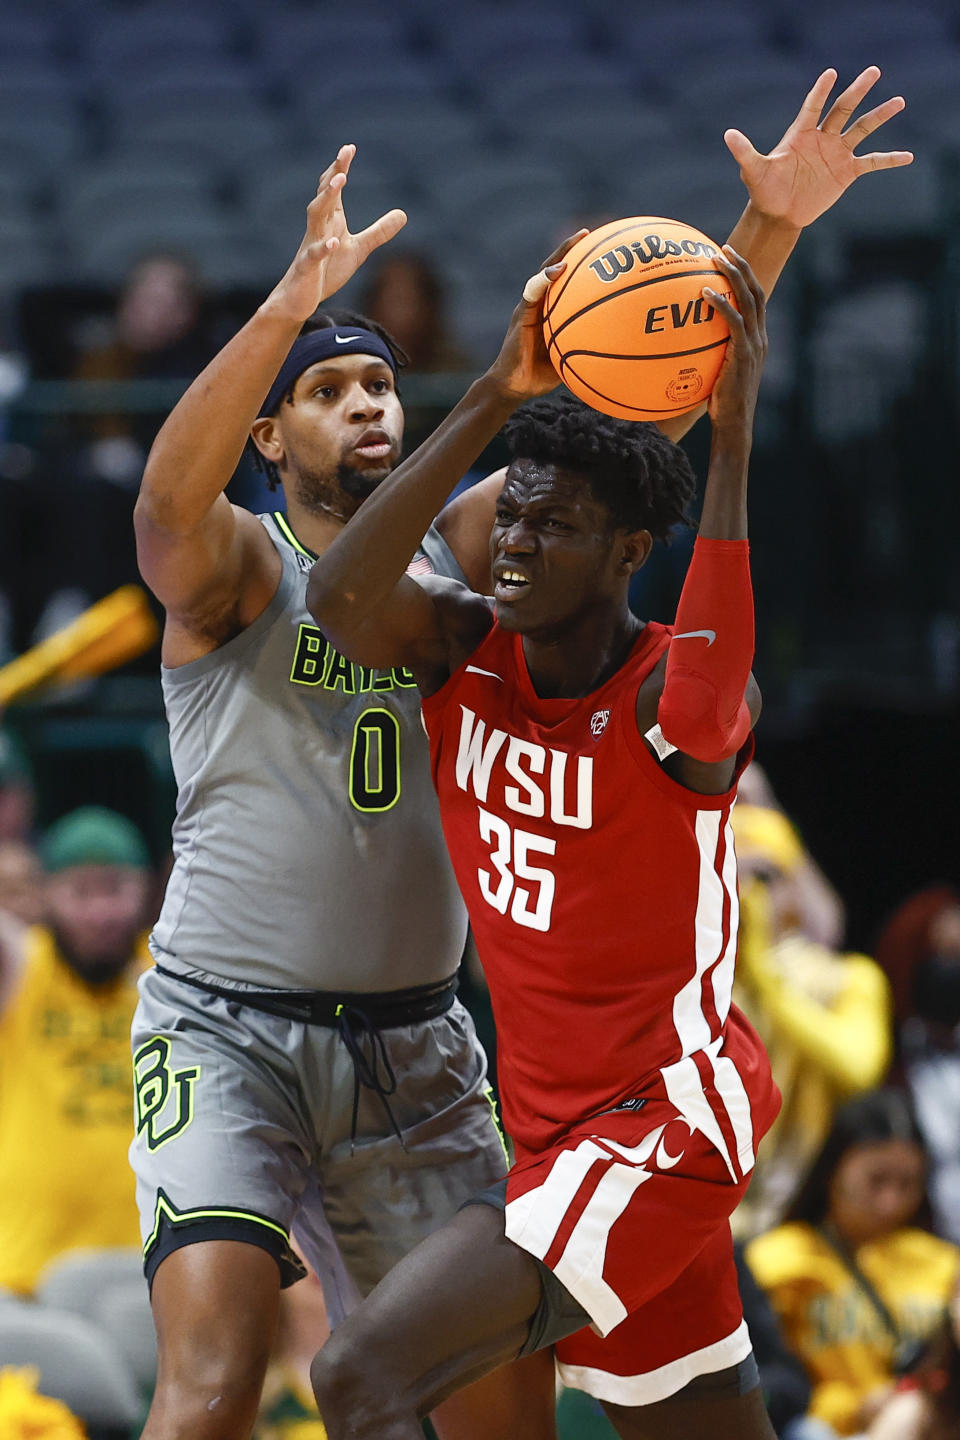 Washington State forward Mouhamed Gueye (35) battles Baylor forward Flo Thamba (0) for space during the first half of an NCAA college basketball game on Sunday, Dec. 18, 2022, in Dallas. (AP Photo/Brandon Wade)